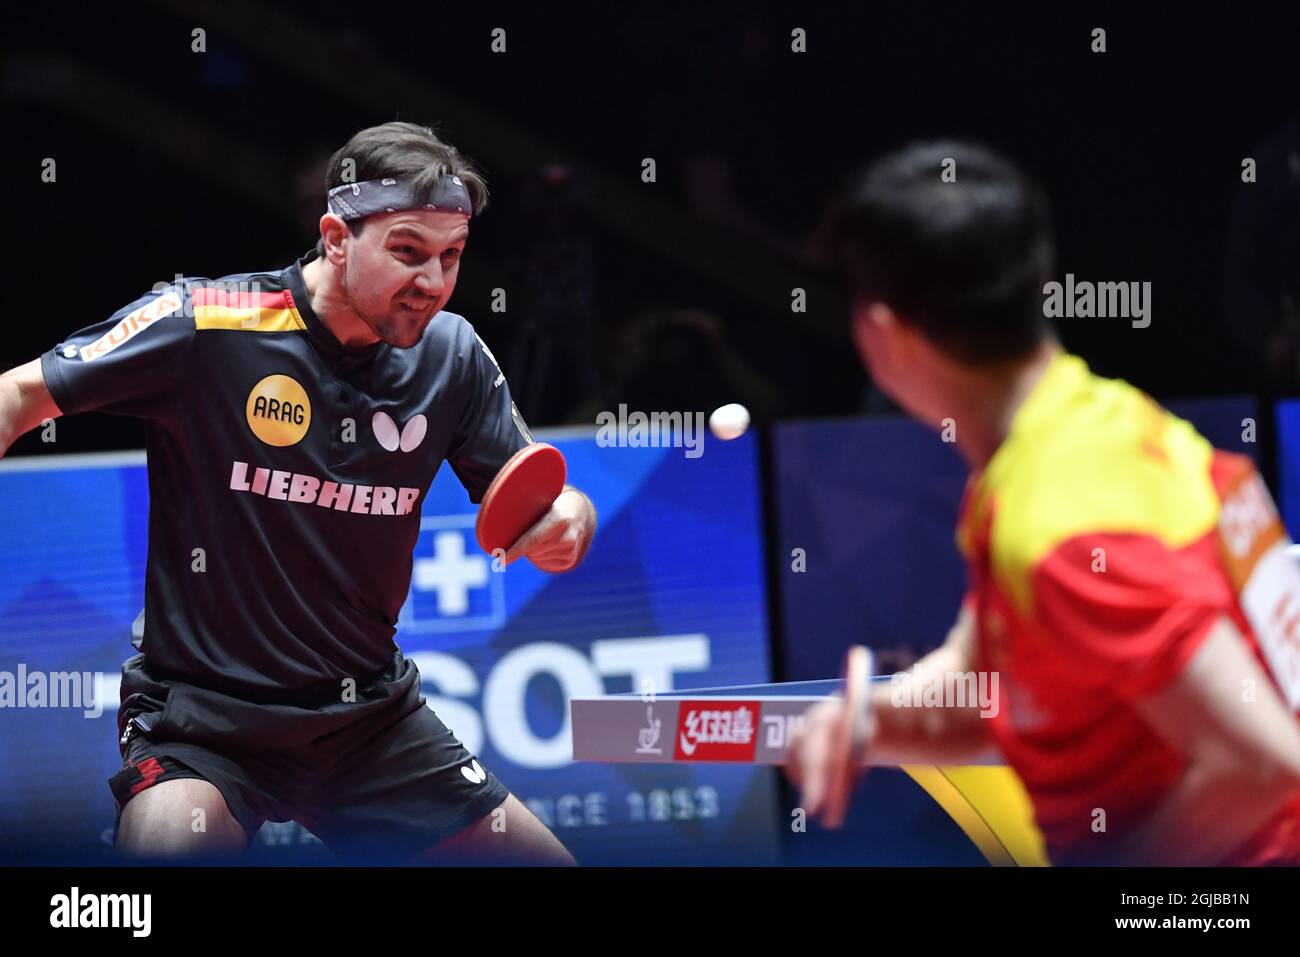 HALMSTAD 20180506 Germany's Timo Boll (L) returns to Long Ma of China during men's final at the World Team Table Tennis Championships in Halmstad, Sweden Sunday May 6, 2018. Photo: Jonas Ekstromer / TT / kod 10030  Stock Photo